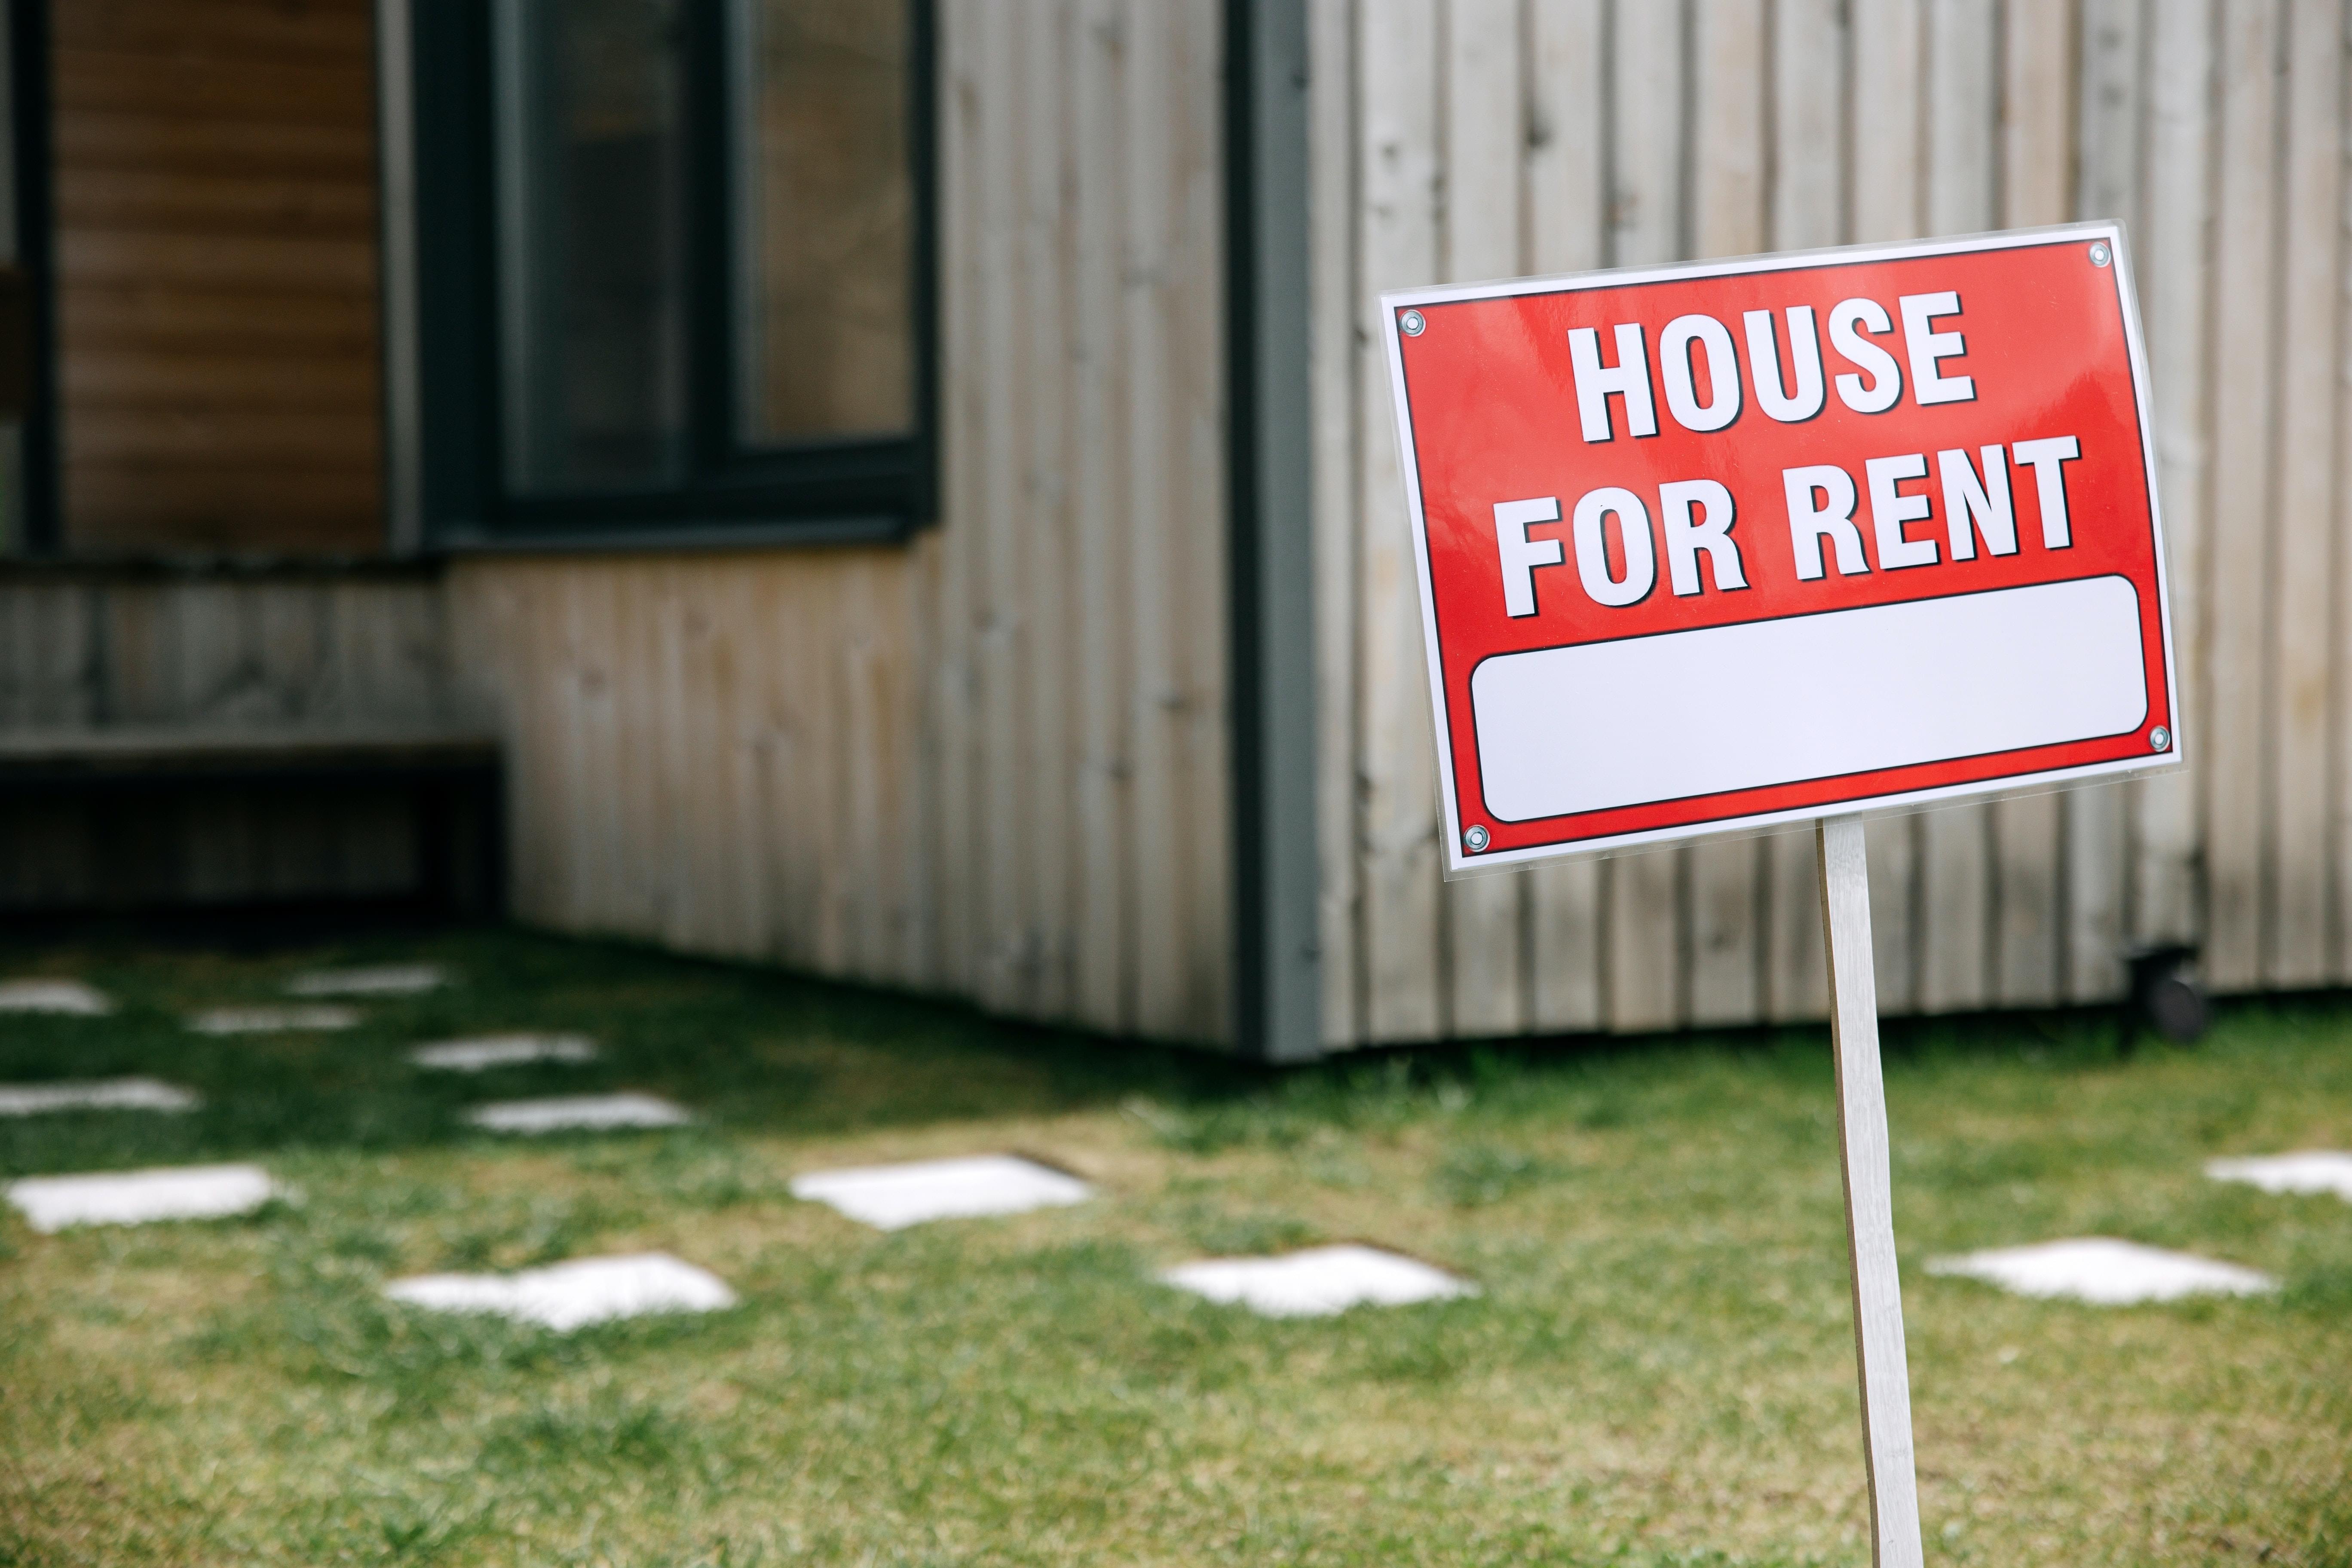 A red "house for rent" sign planted in the grass in front of a home